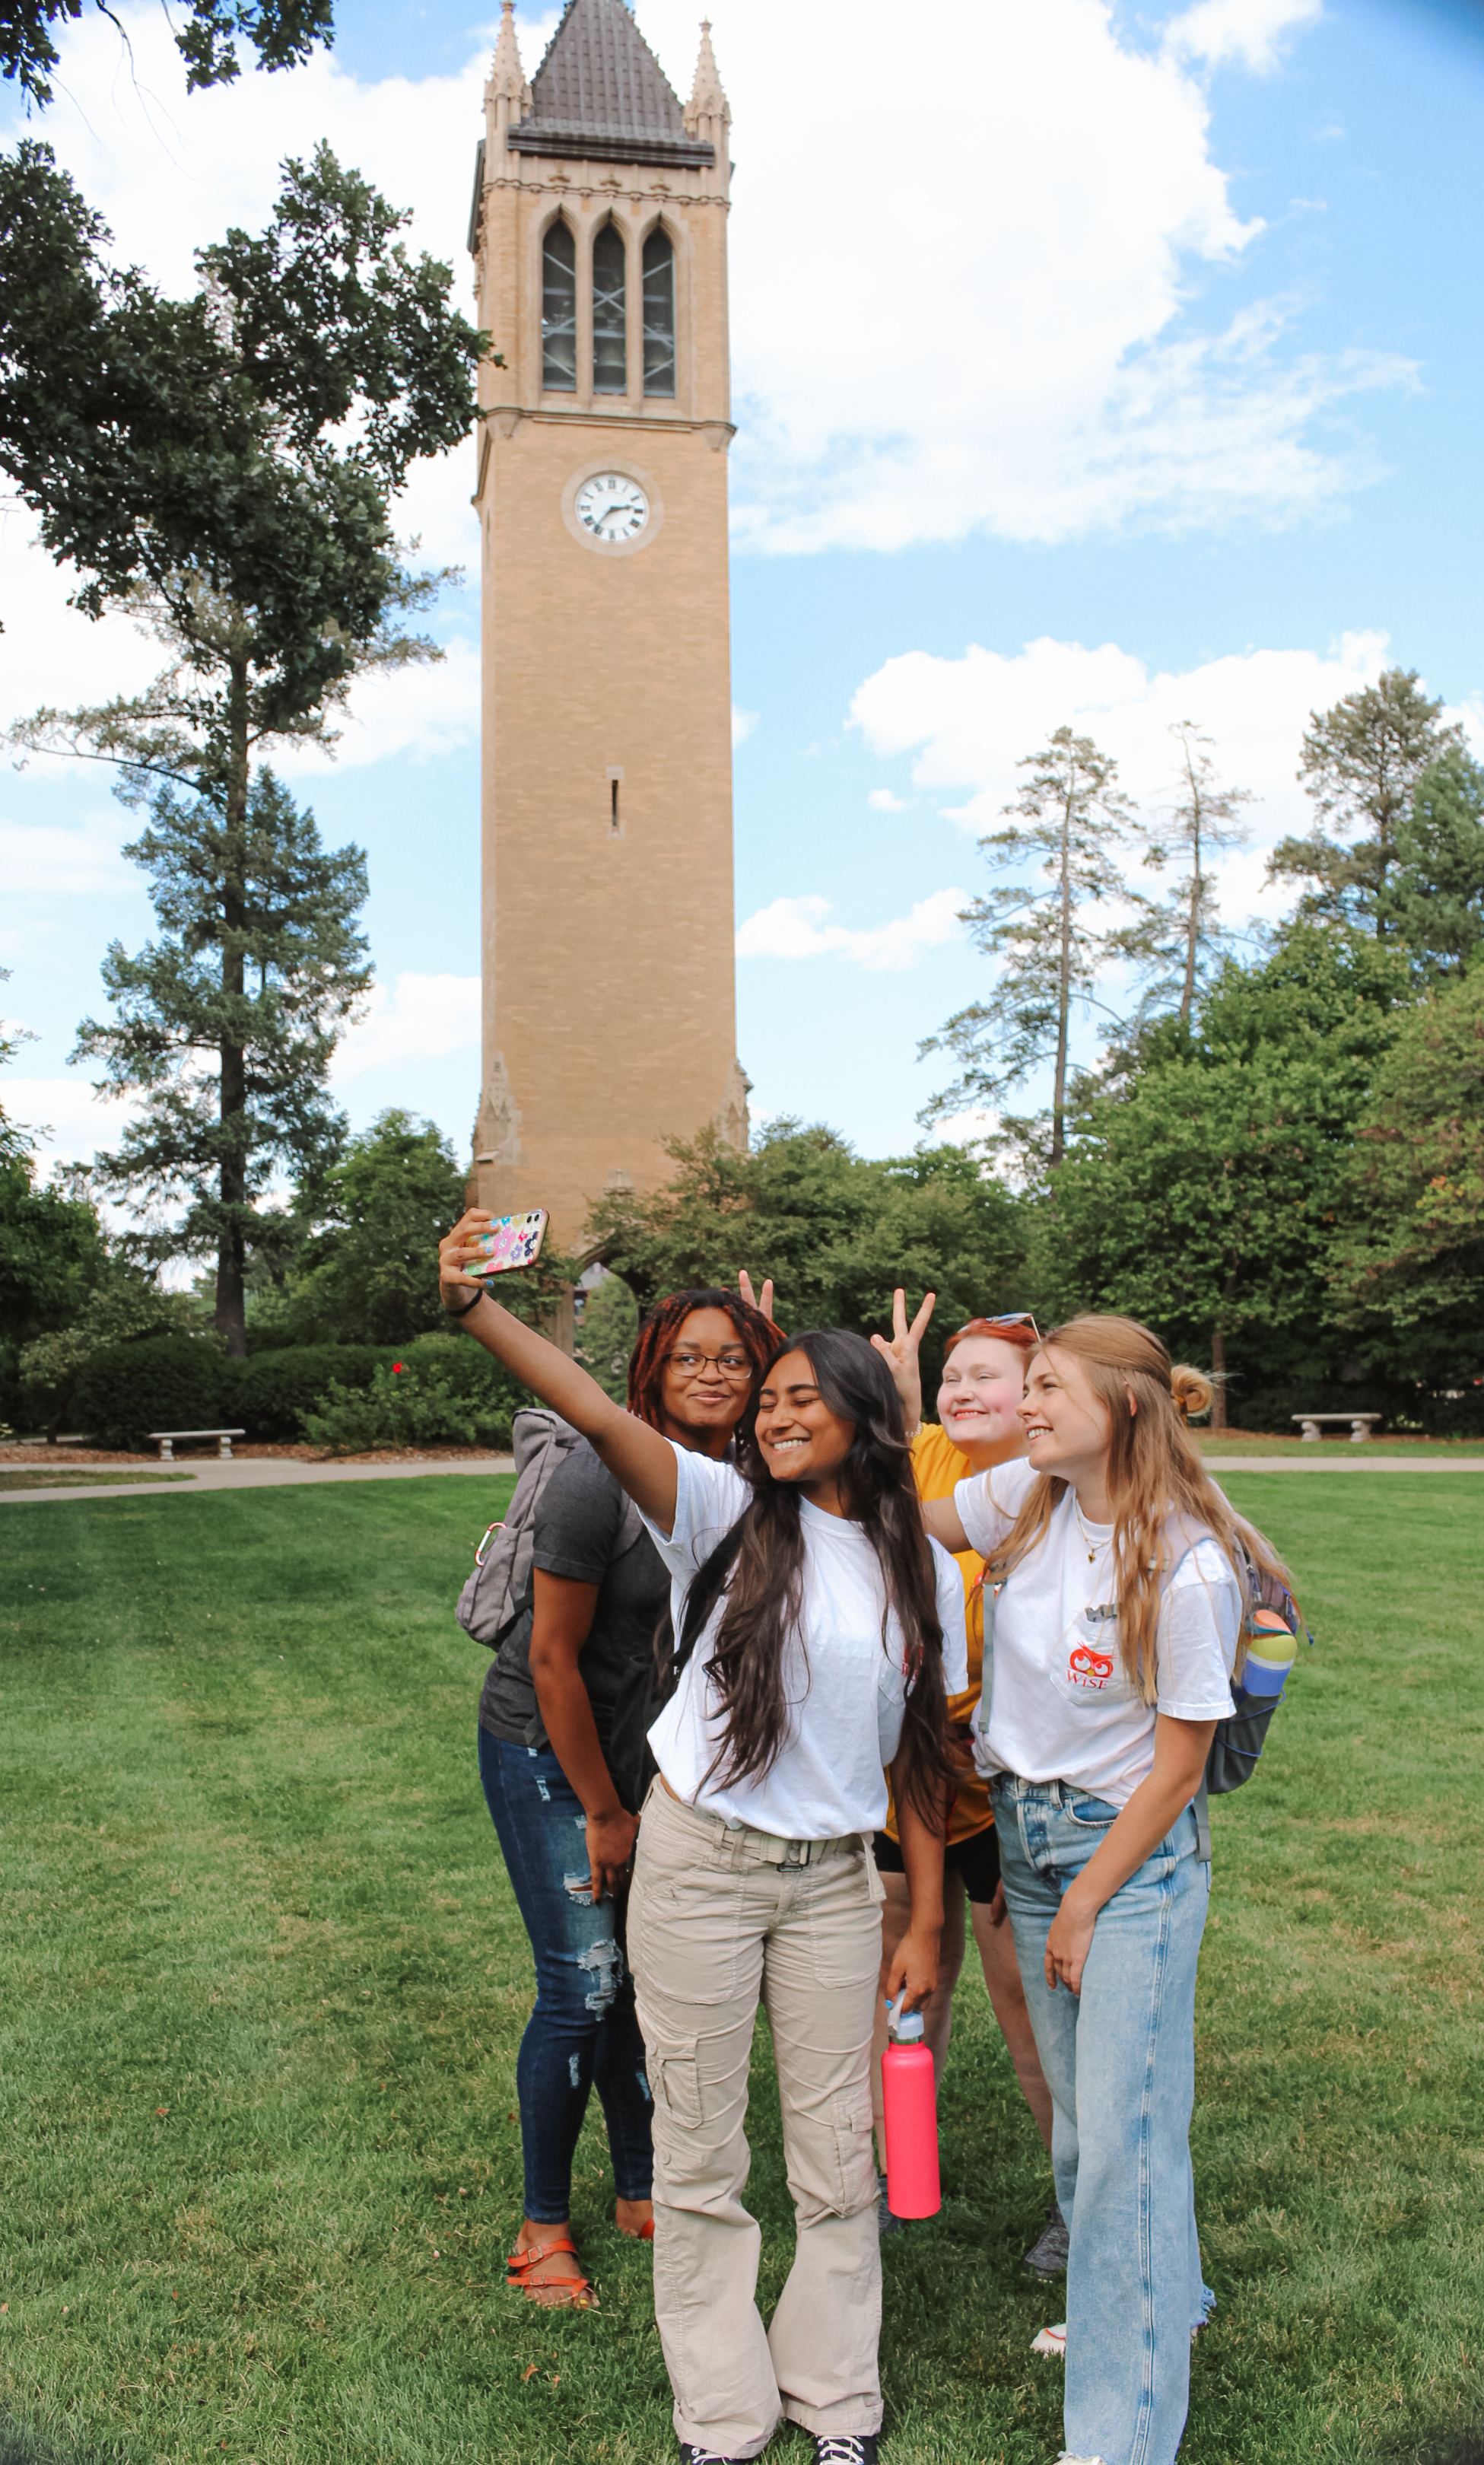 Students taking a selfie in front of the Campanile.